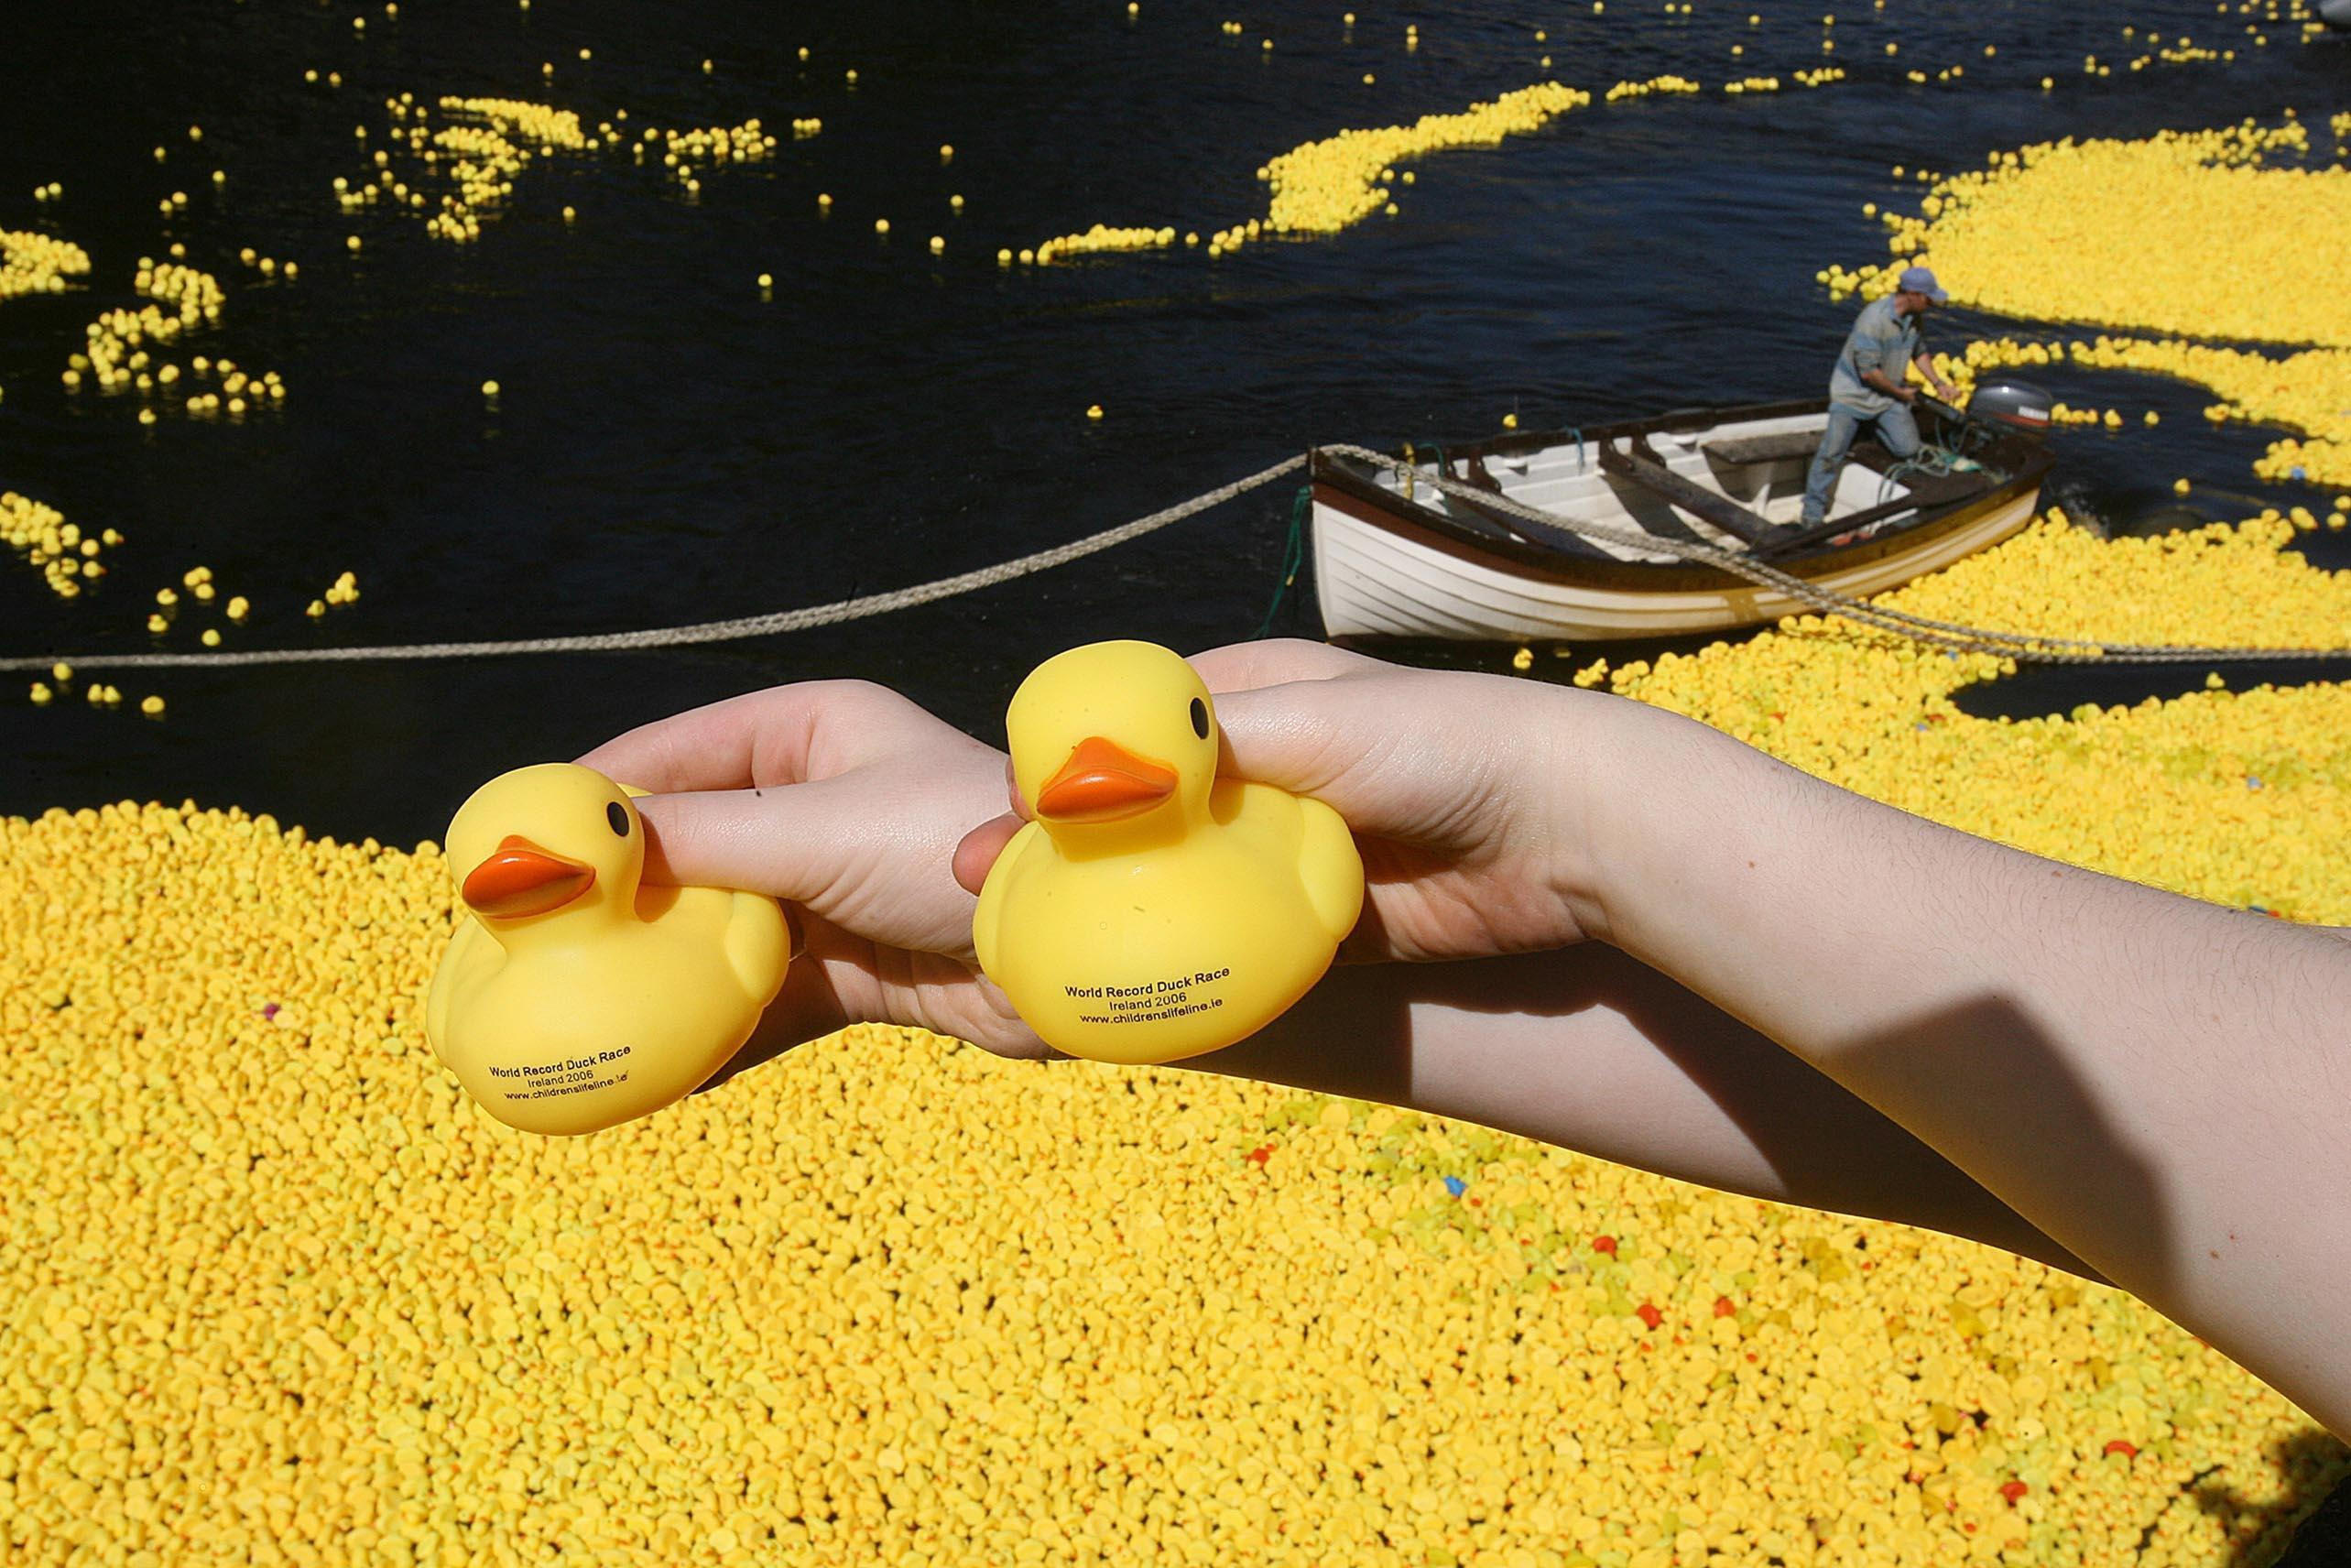 rubber duck found 18 years after it was lost at sea